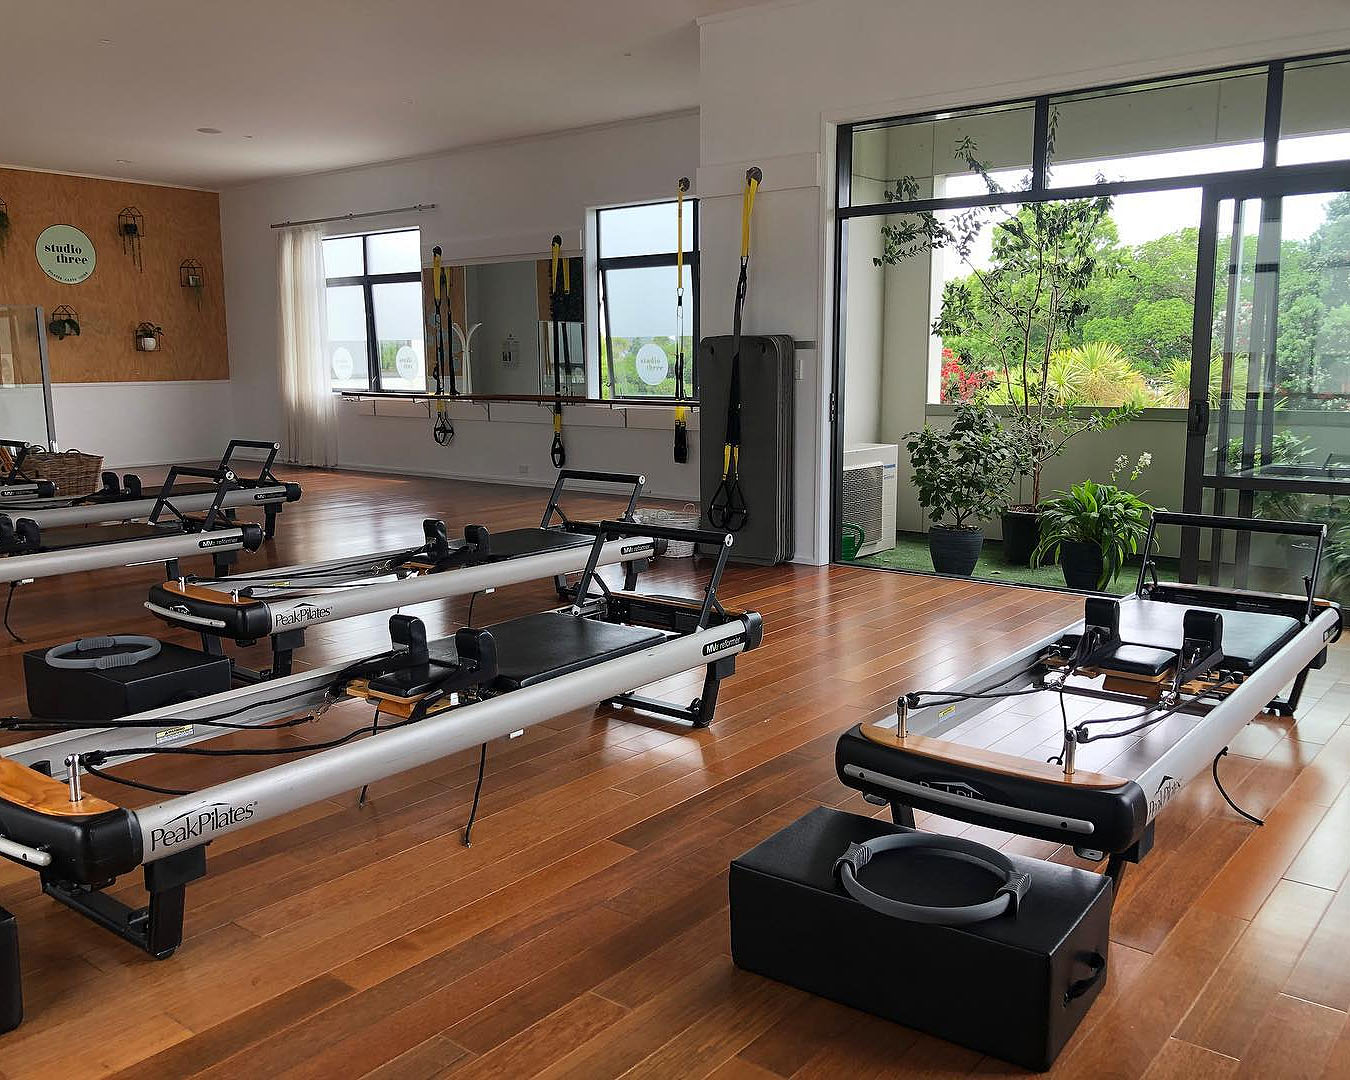 The light and airy space at Studio Three in Grey Lynn, all set up with pilates equipment.